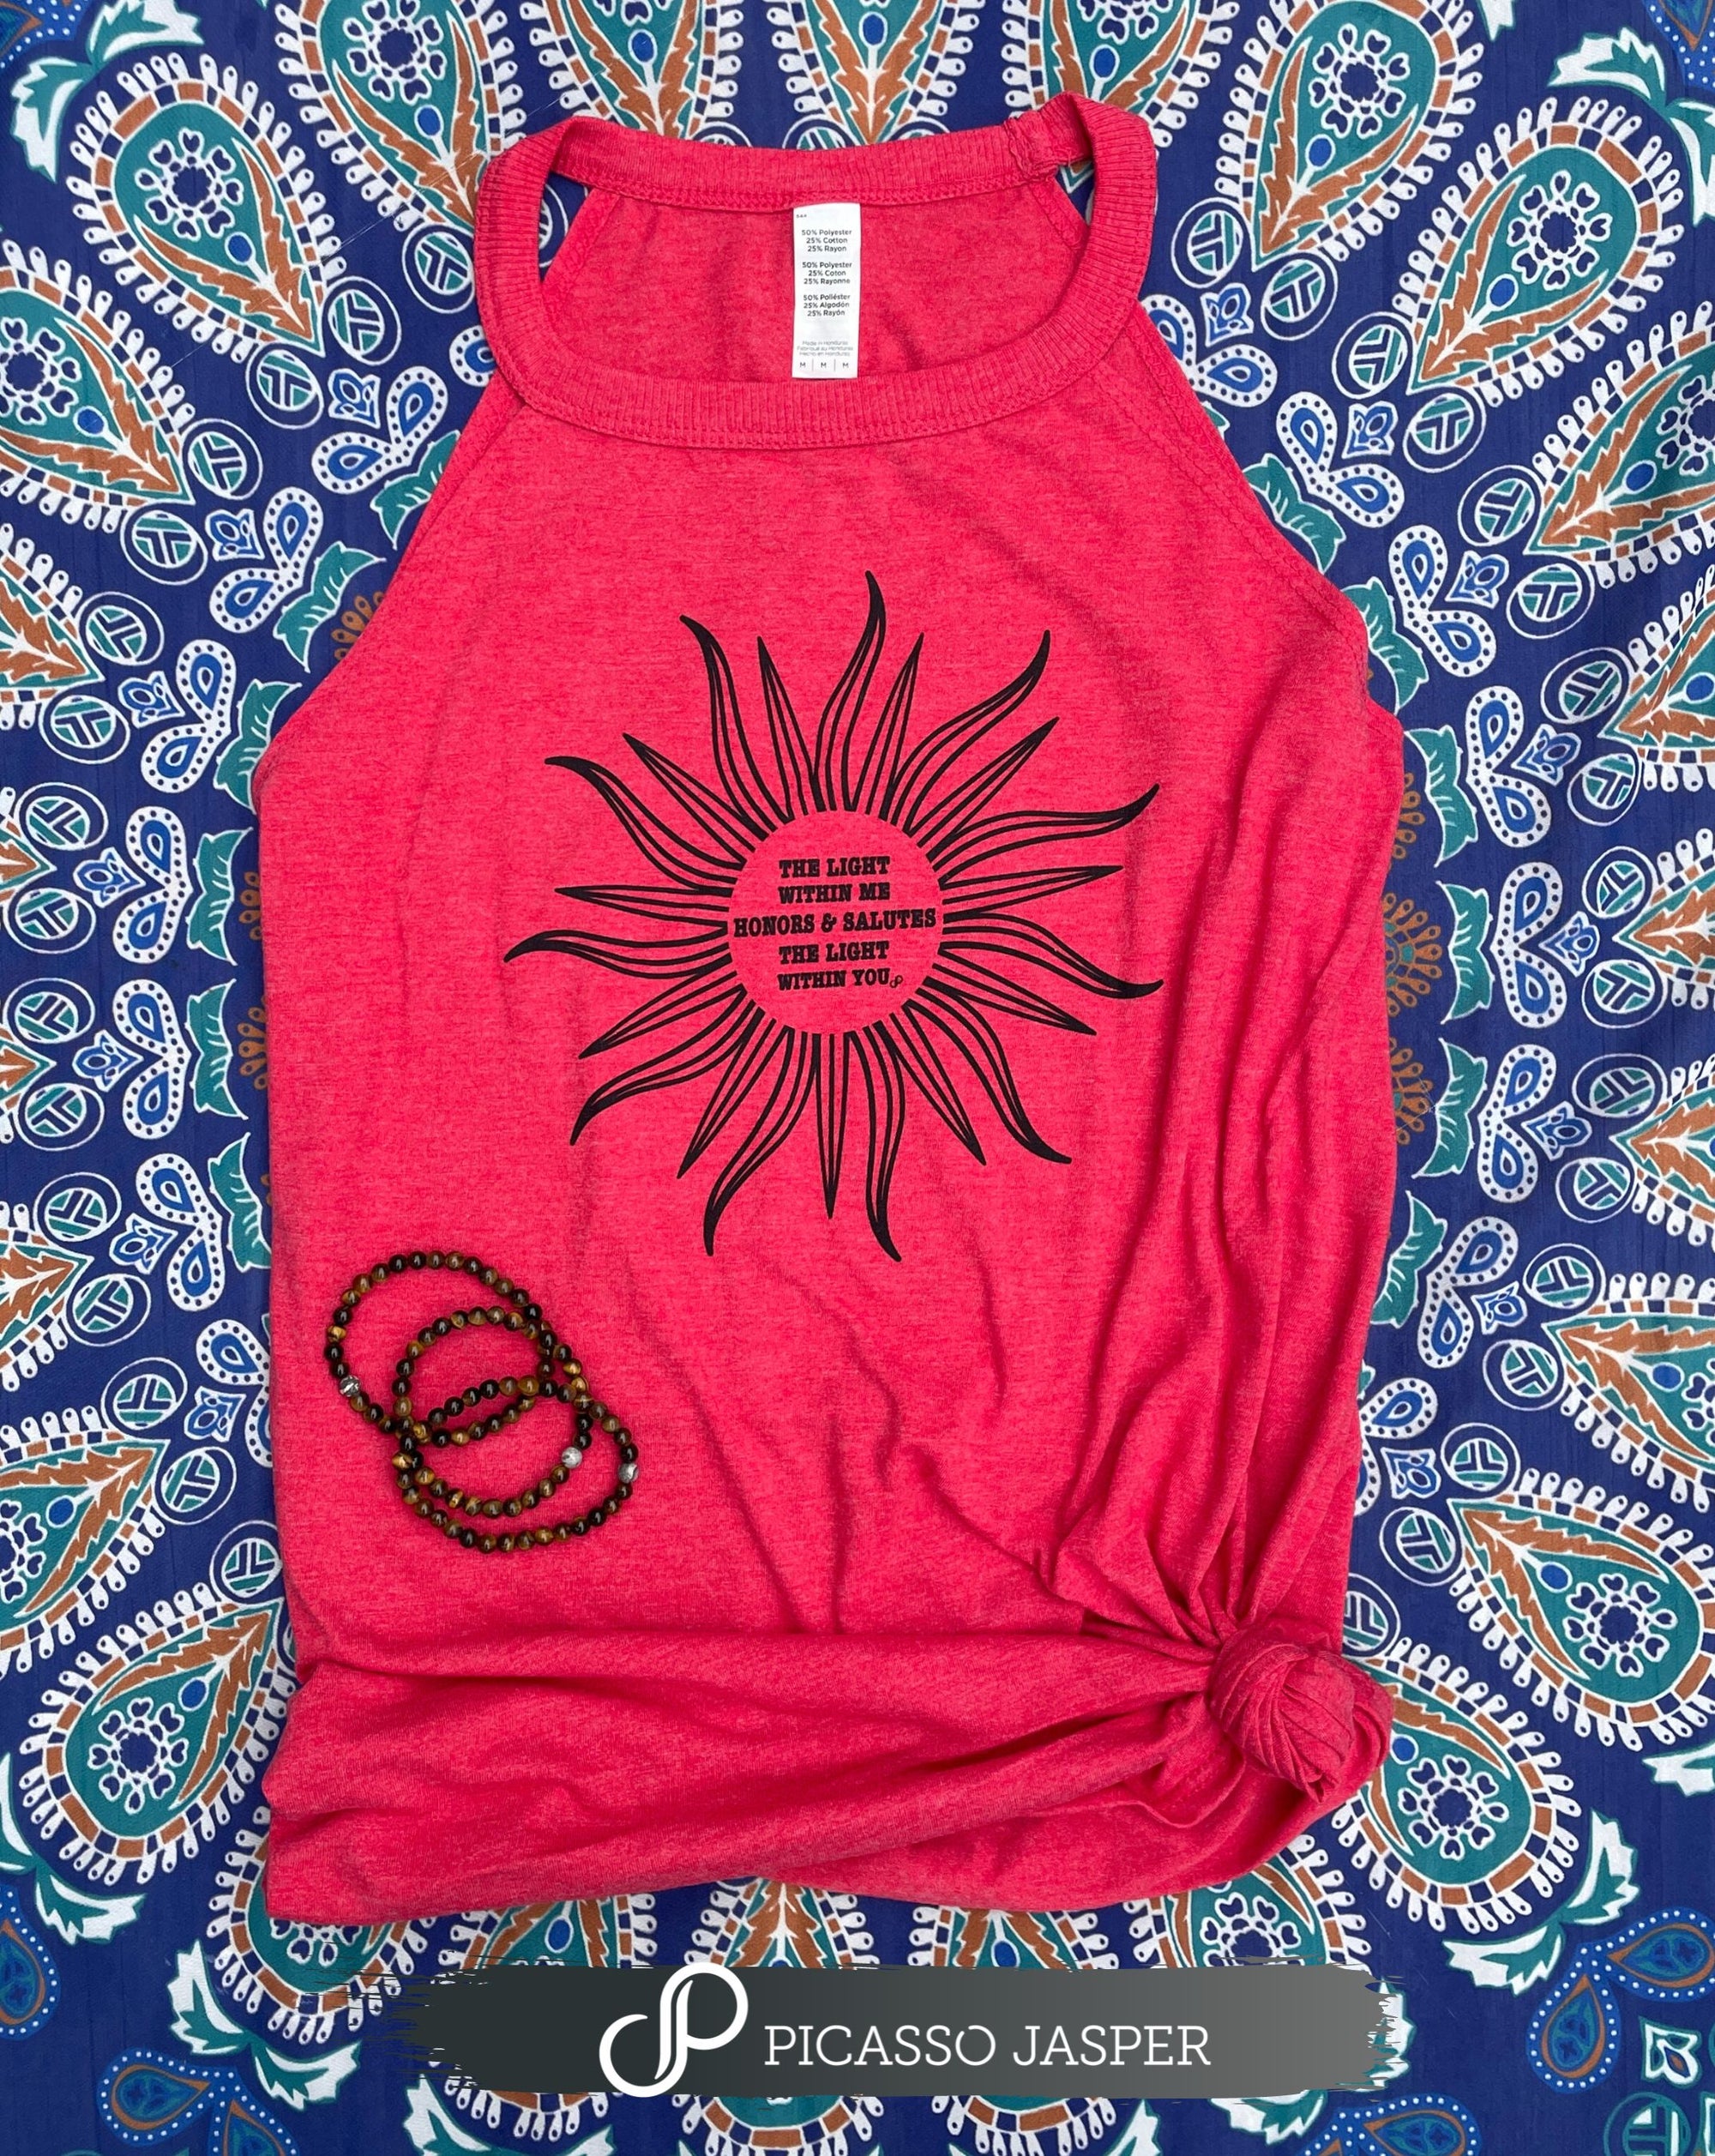 XXL ONLY! The Light Within Me Honors & Salutes the Light Within You! High Neck Red Tank